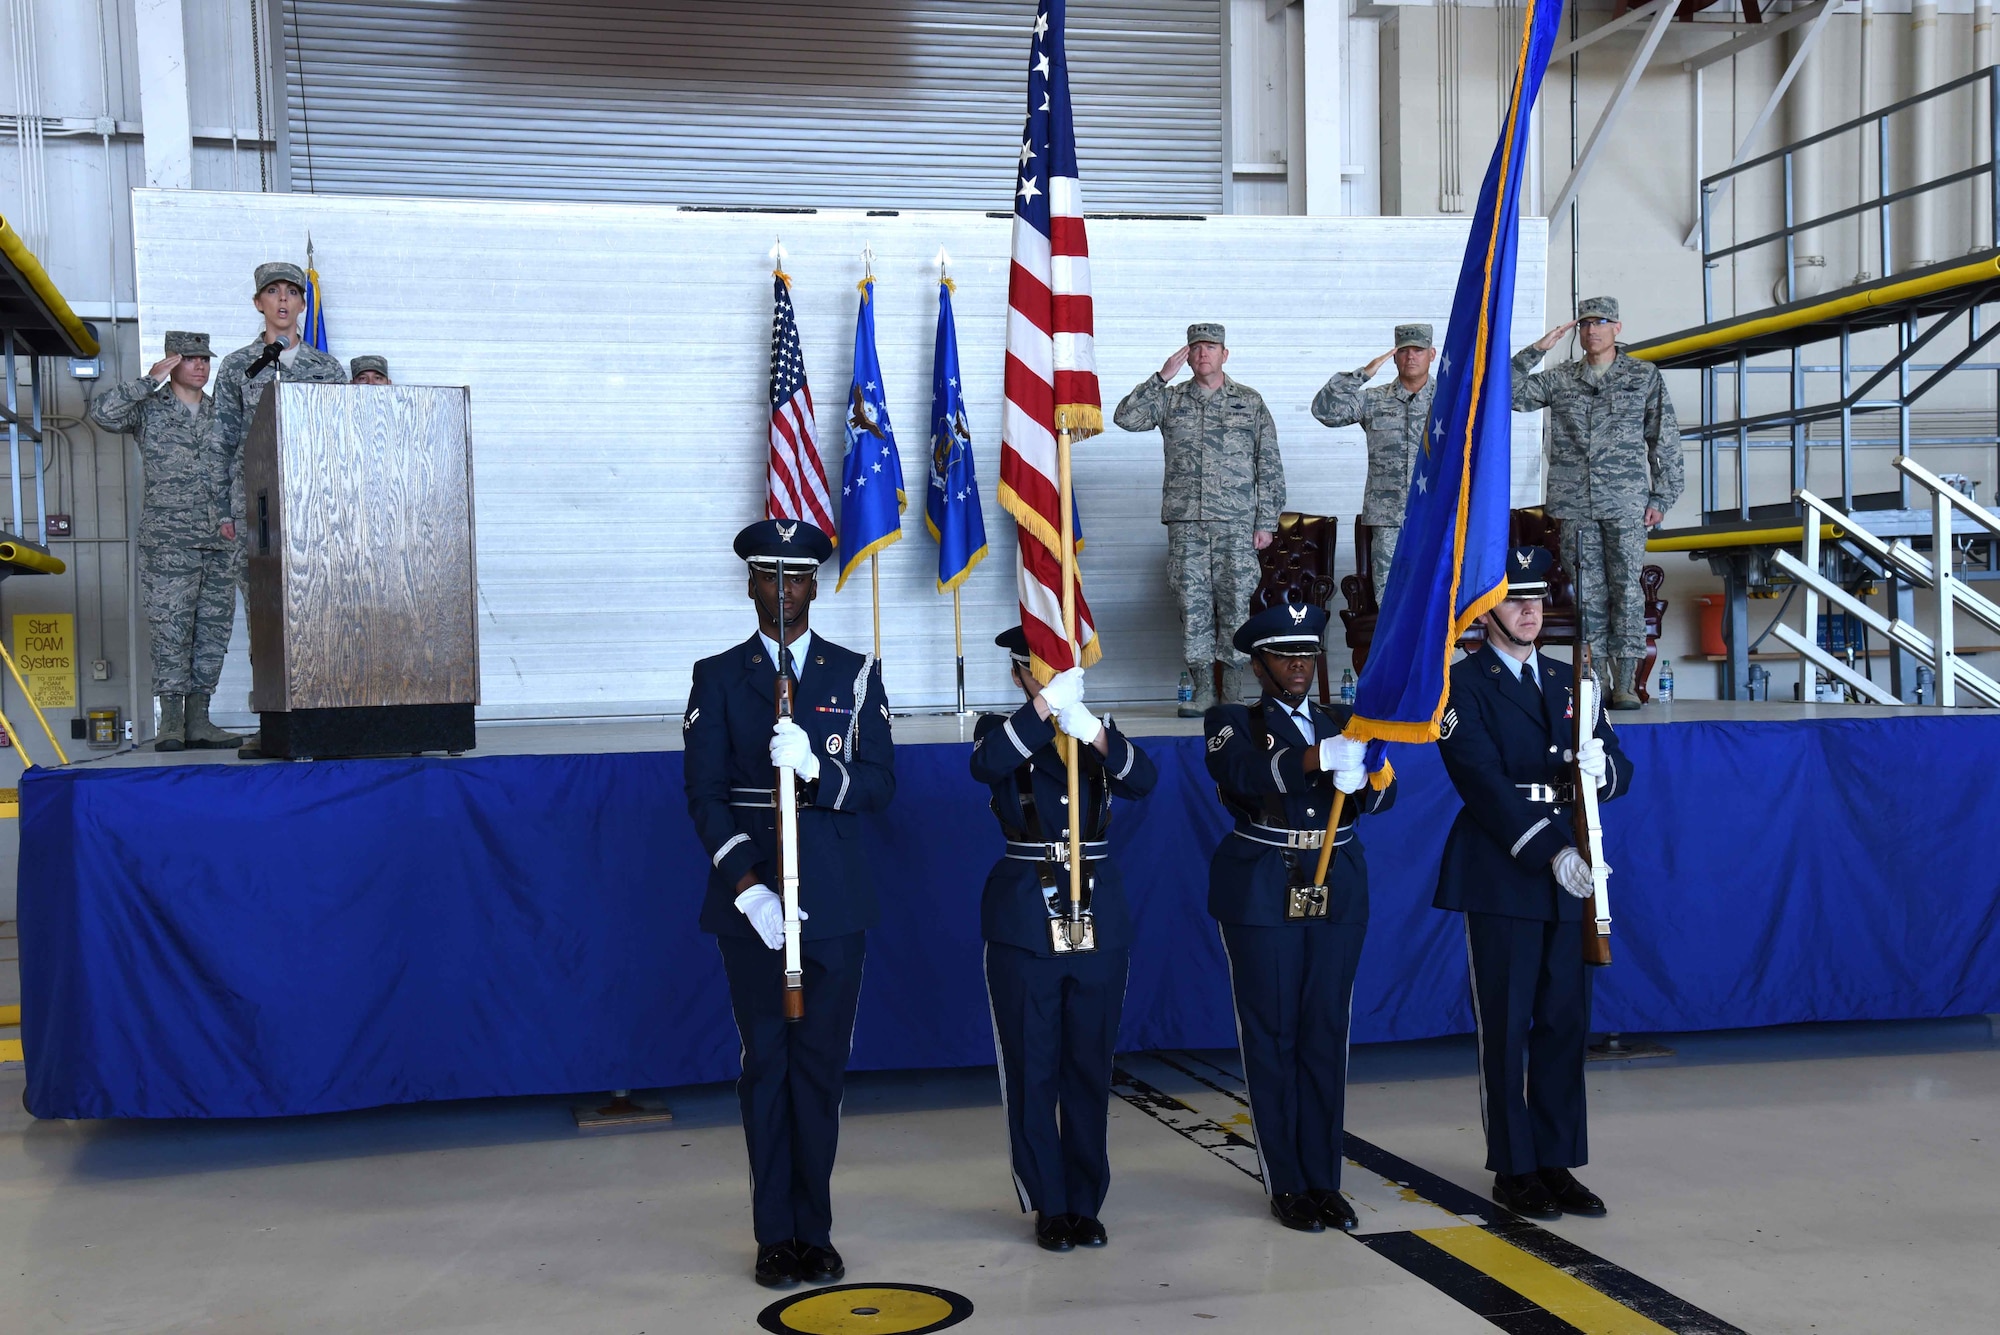 Keesler Honor Guard members present the colors during the 22nd Air Force change of command ceremony Nov. 14, 2017, at Keesler Air Force Base, Mississippi. Maj. Gen. Craig L. La Fave took command of 22nd Air Force during the ceremony. (U.S. Air Force photo by Tech. Sgt. Ryan Labadens)